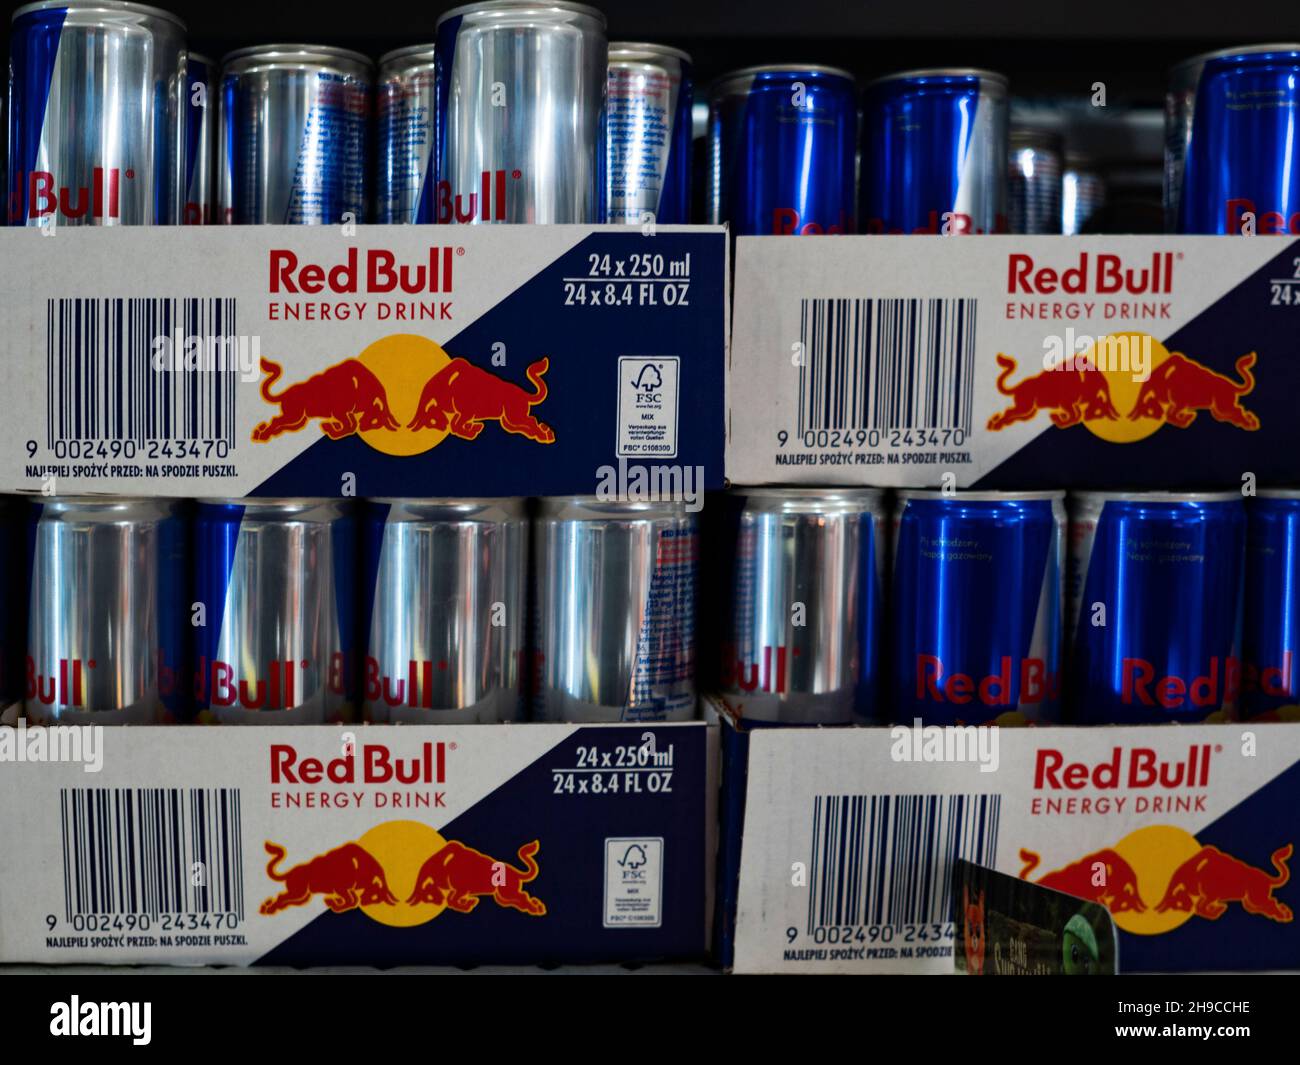 Boxes of Aluminium can of Red Bull Energy drink in the store. Red Bull is the most popular energy drink in the world Stock Photo